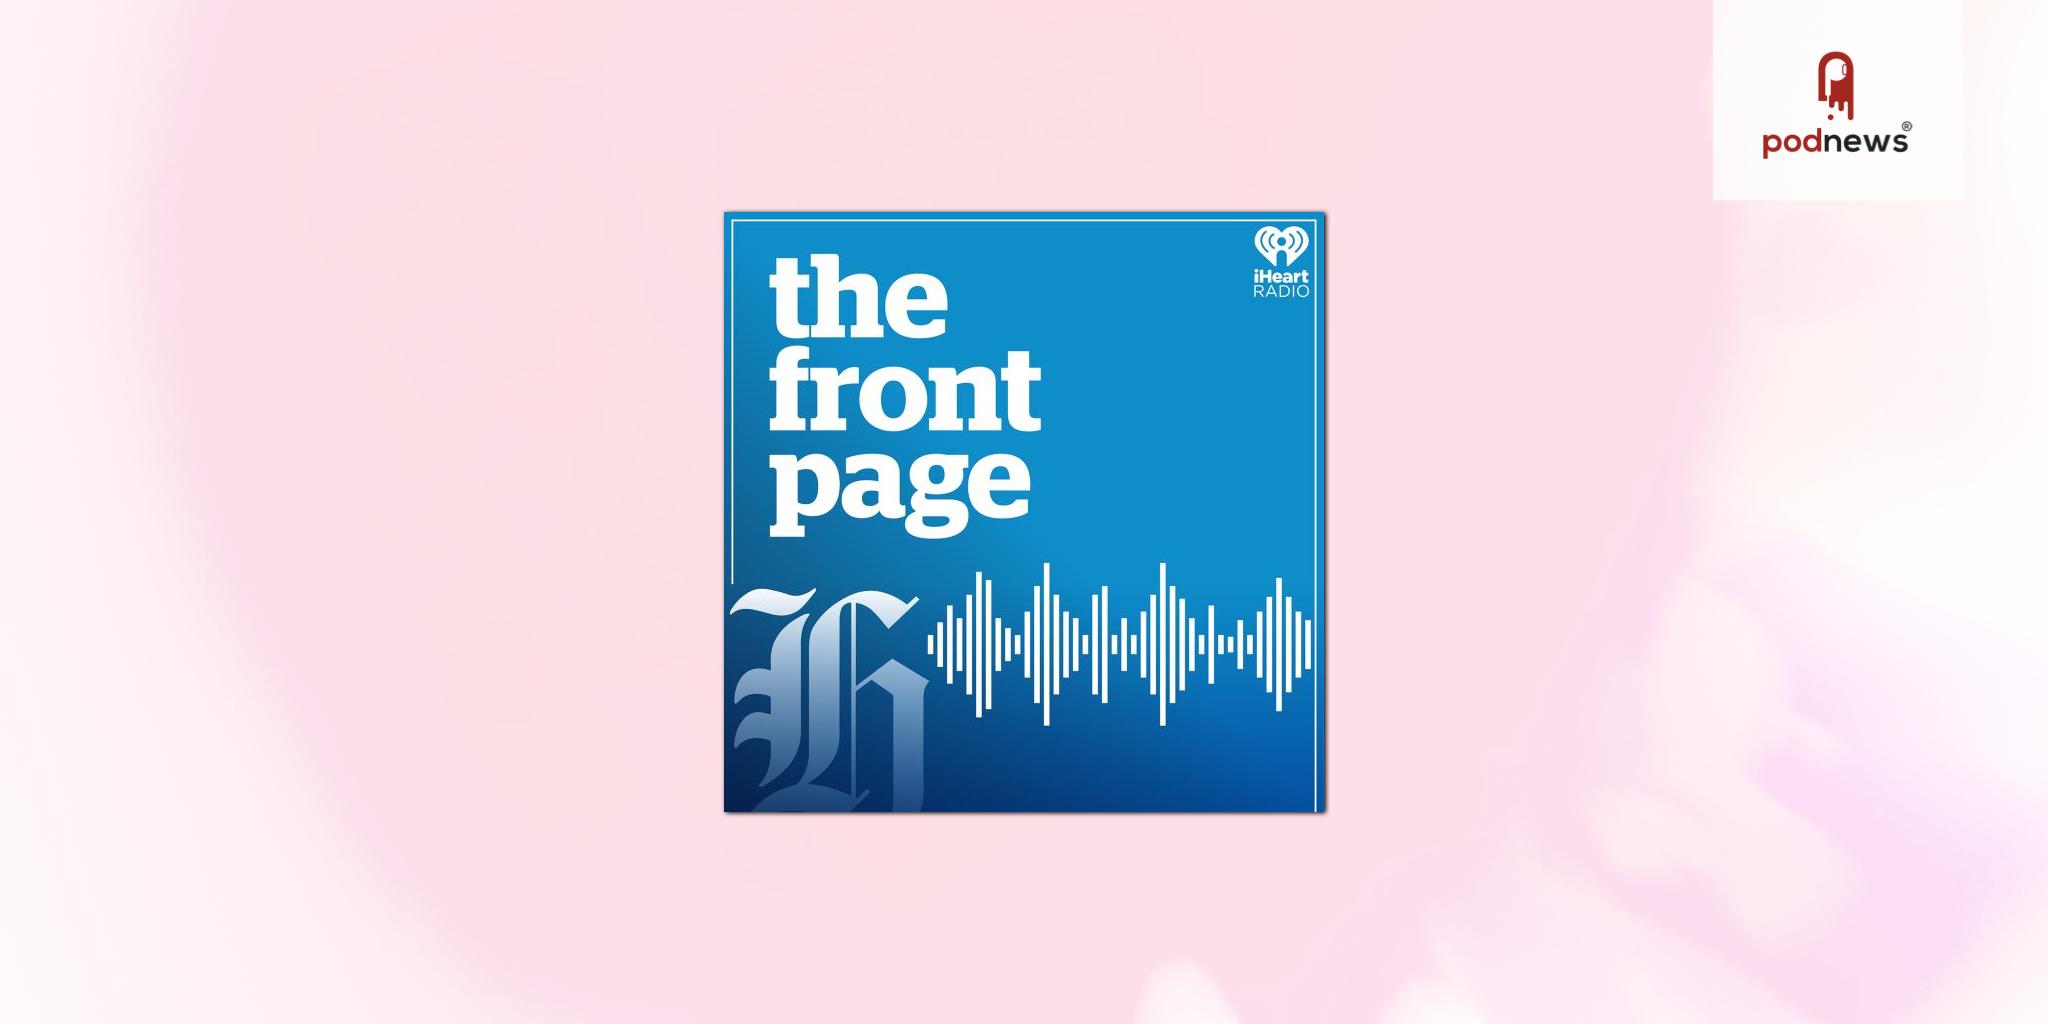 NZ Herald’s The Front Page celebrates more than 1 million downloads in its first year